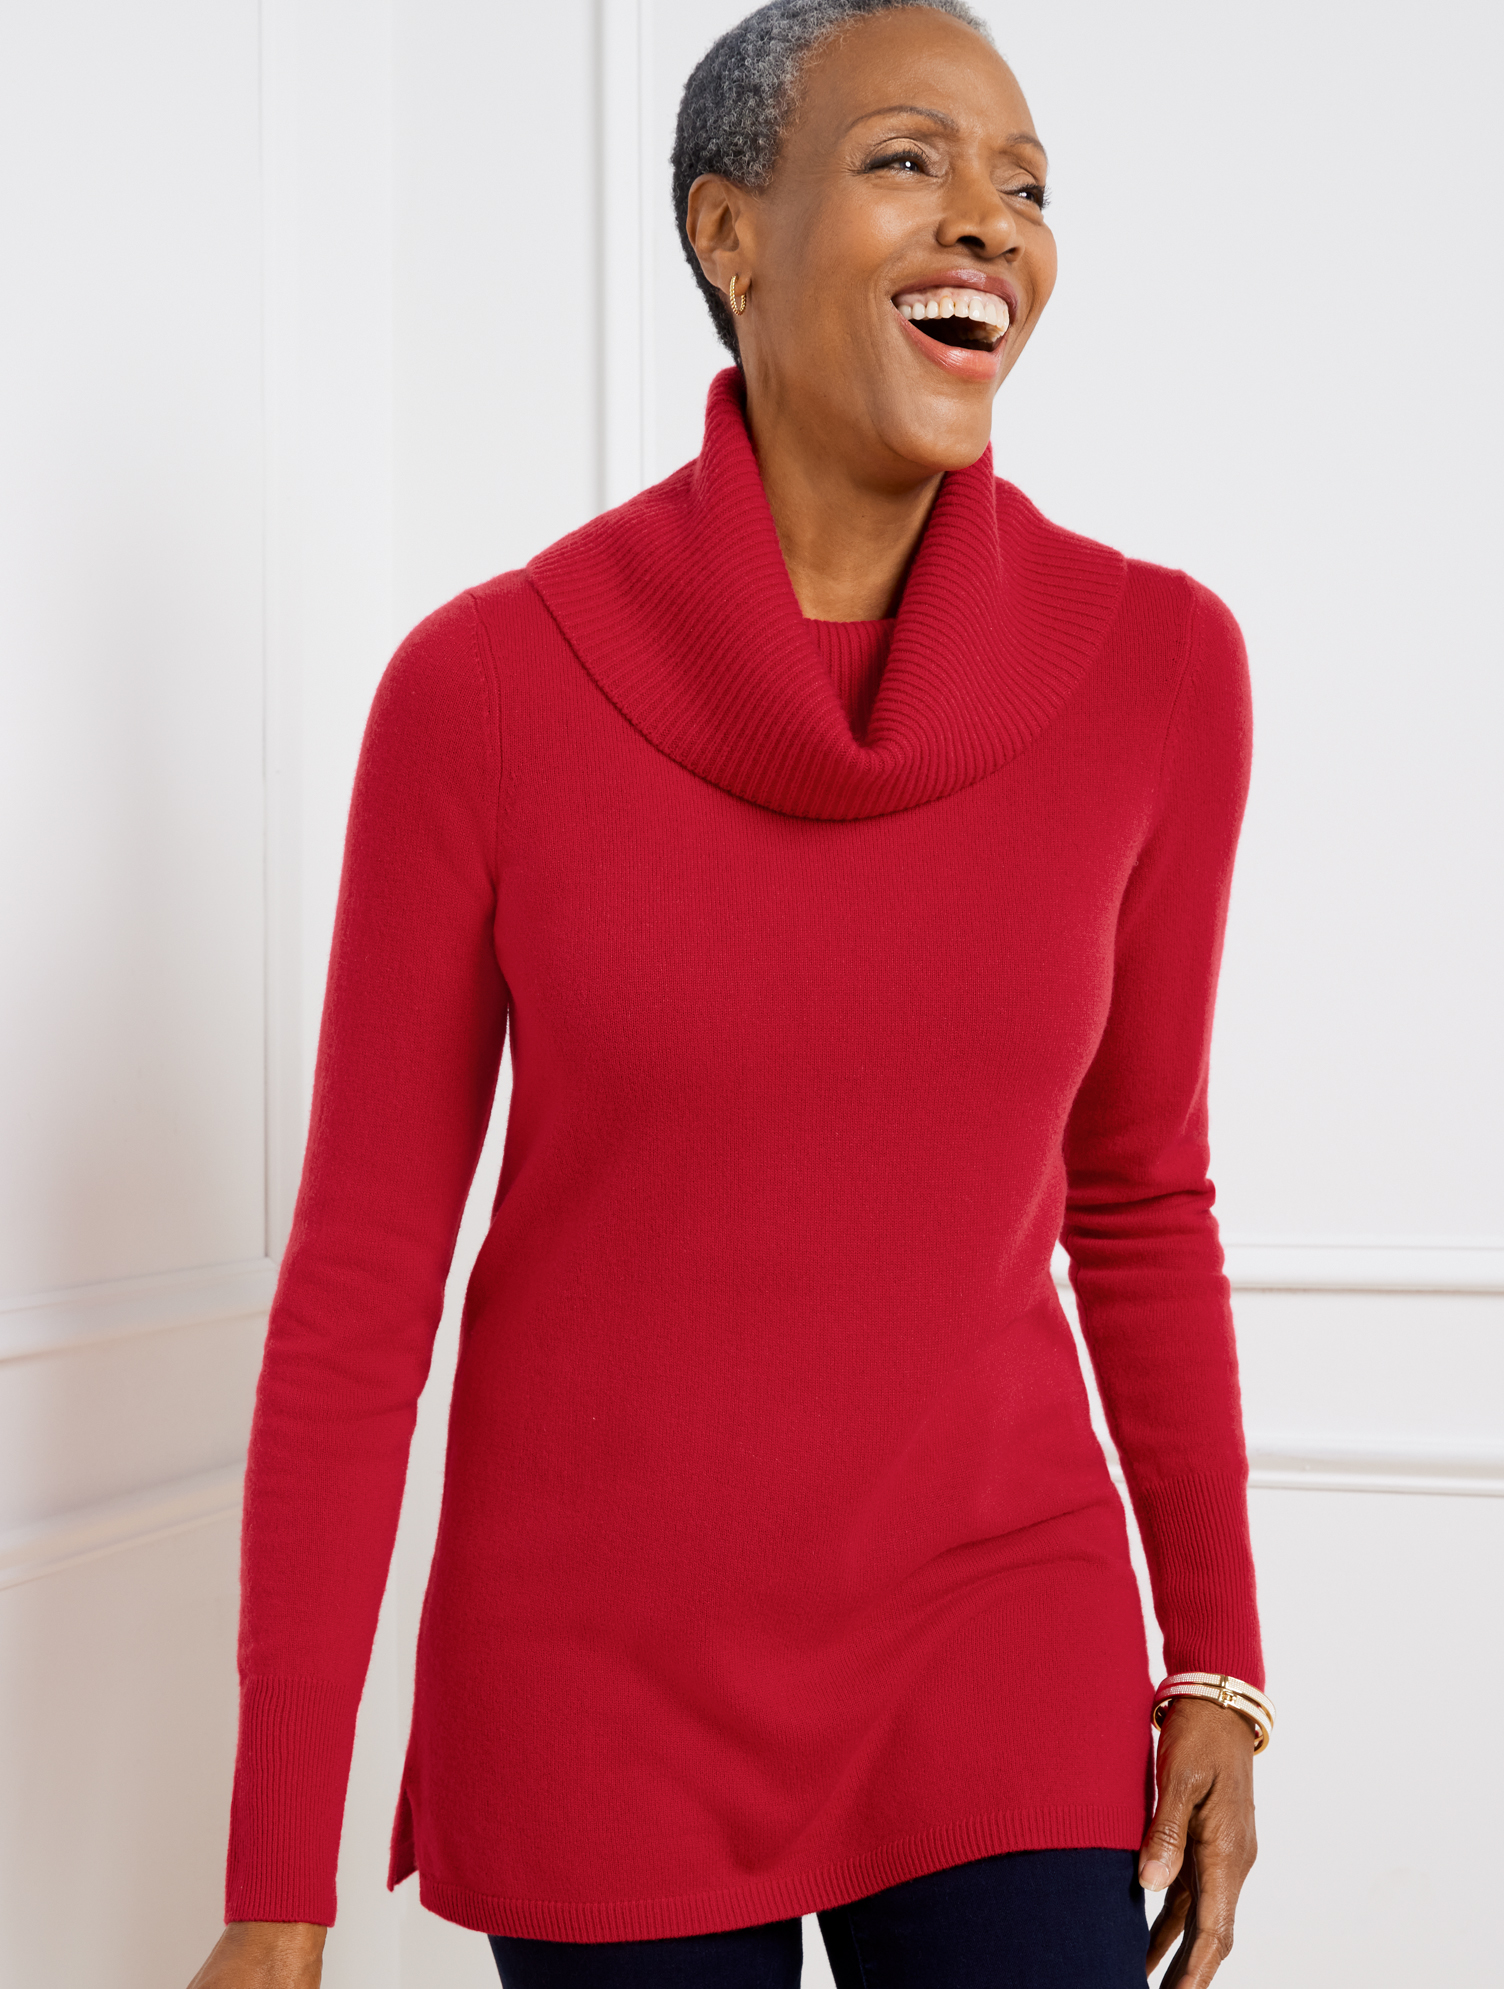 Talbots Plus Size - Cowlneck Cashmere Pullover Sweater - Red - 1x